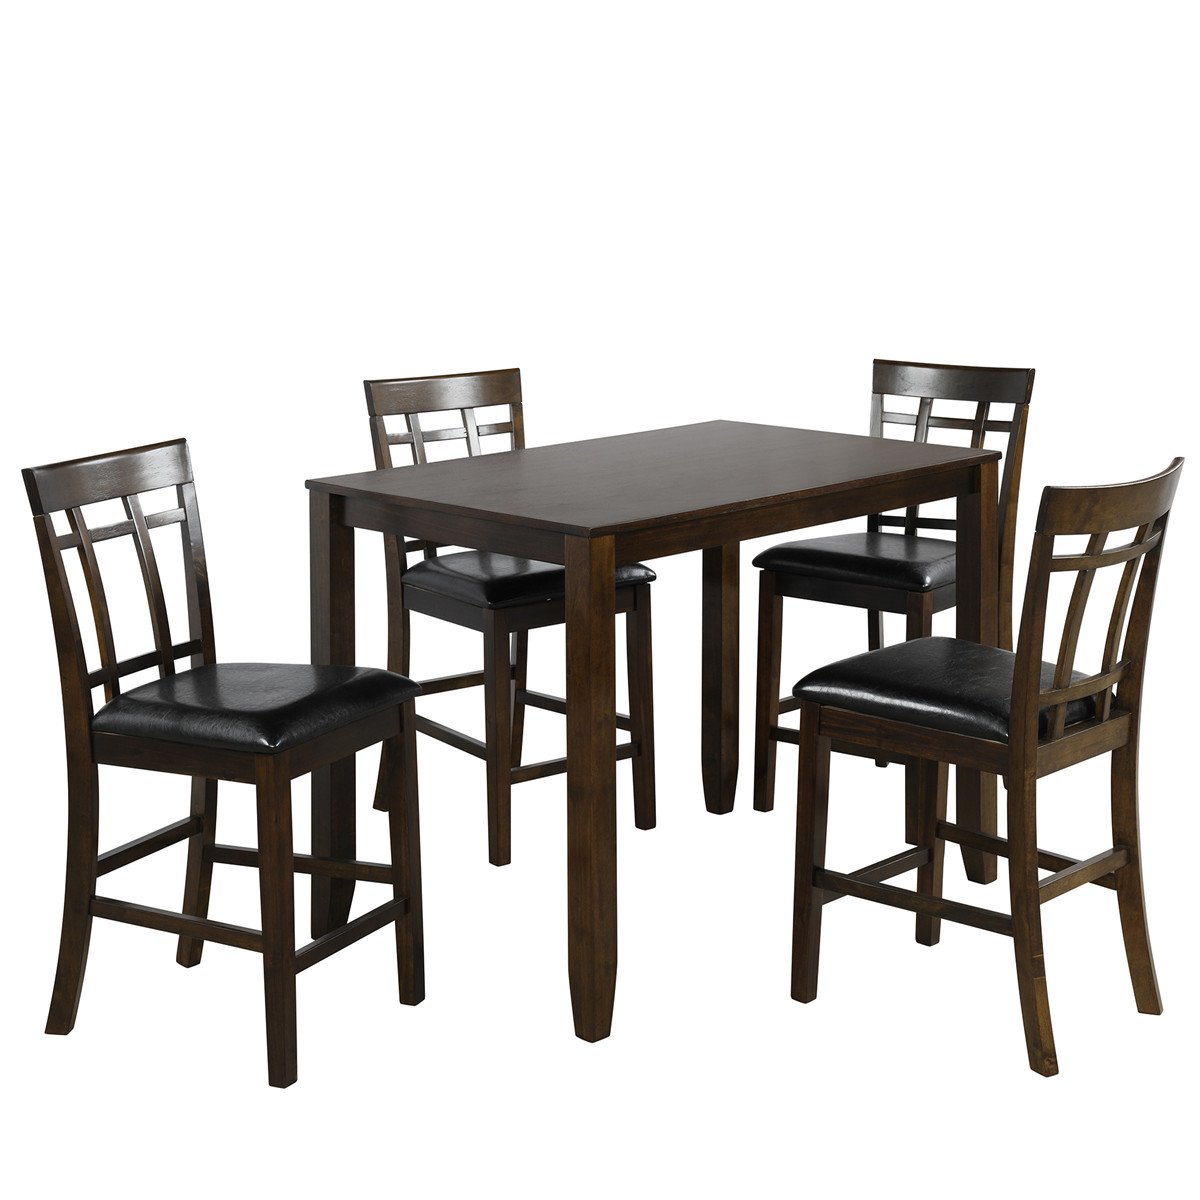 Vintage Rectangular Counter Height Bar Table with 4 Chairs | Wood Dining Table and Chair Set